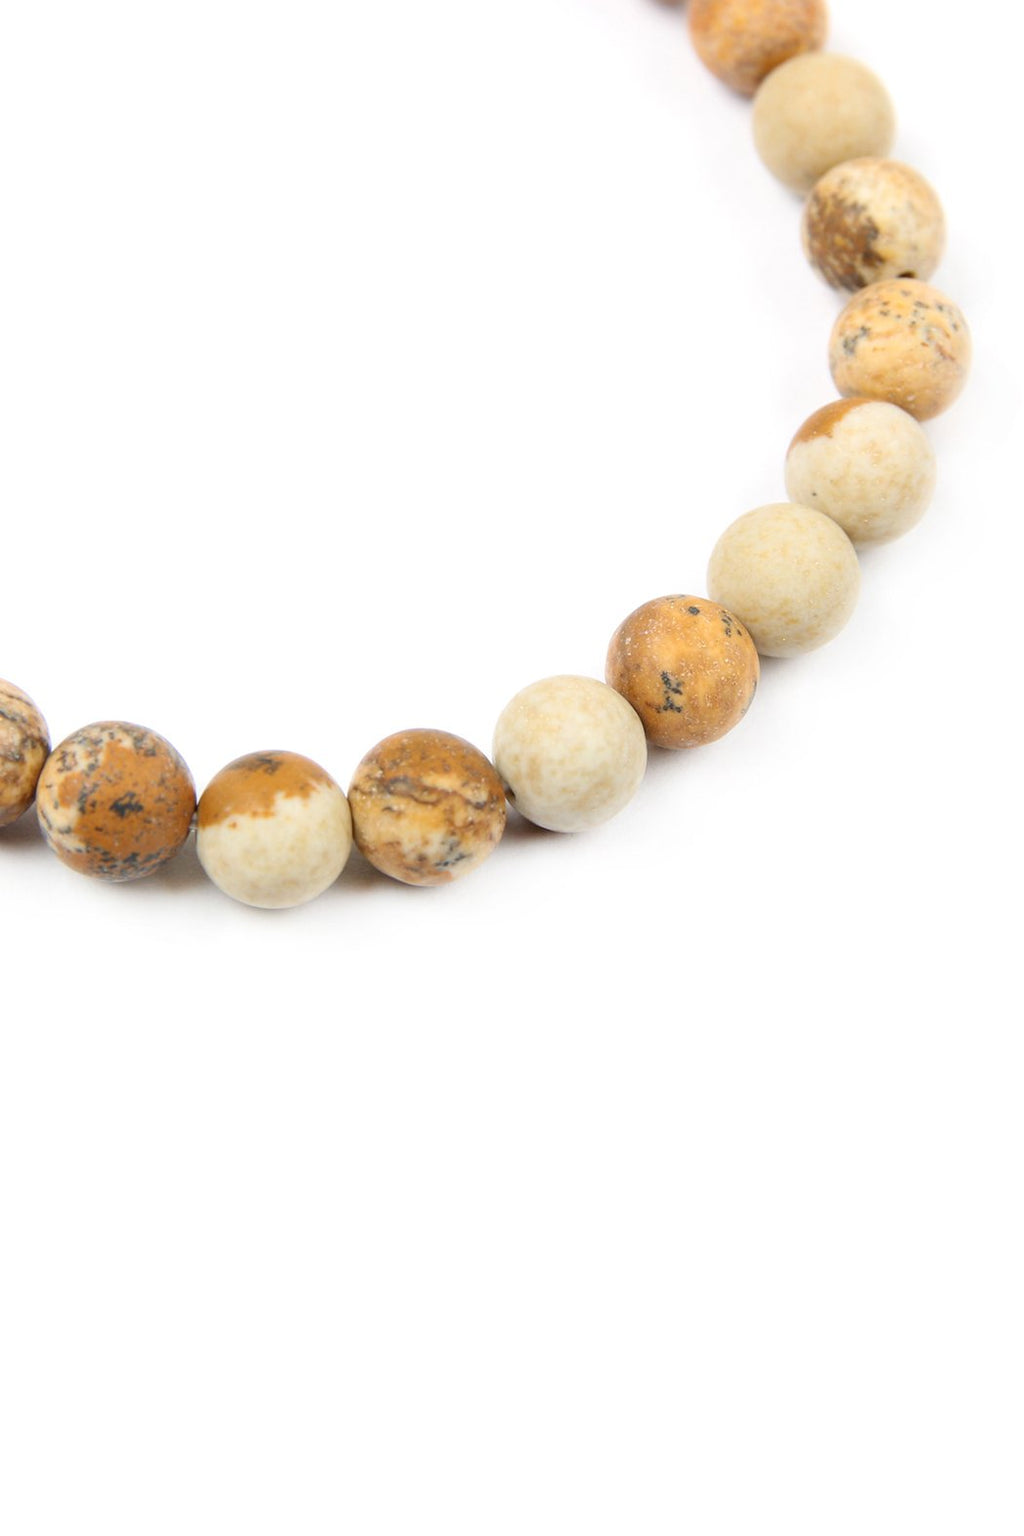 83589 - "Love and Be Loved" Natural Stone Stretch Bracelet